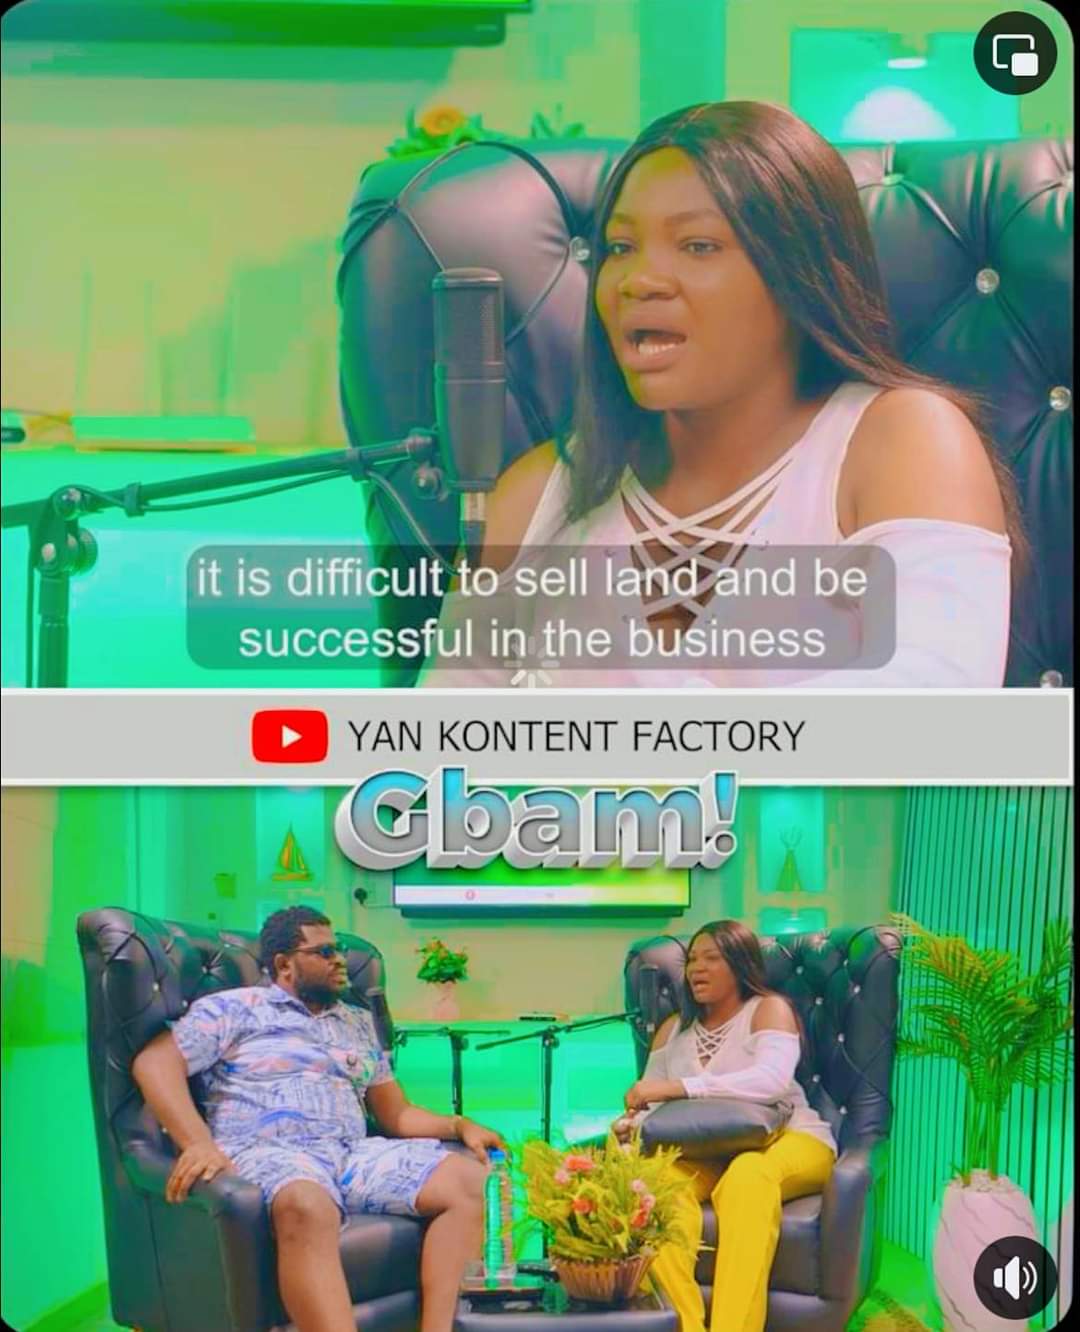 Self-Acclaimed Repented "Akwuna" Chinwe Reveals With Ladies Do To Succeed In Real Estate (Video)